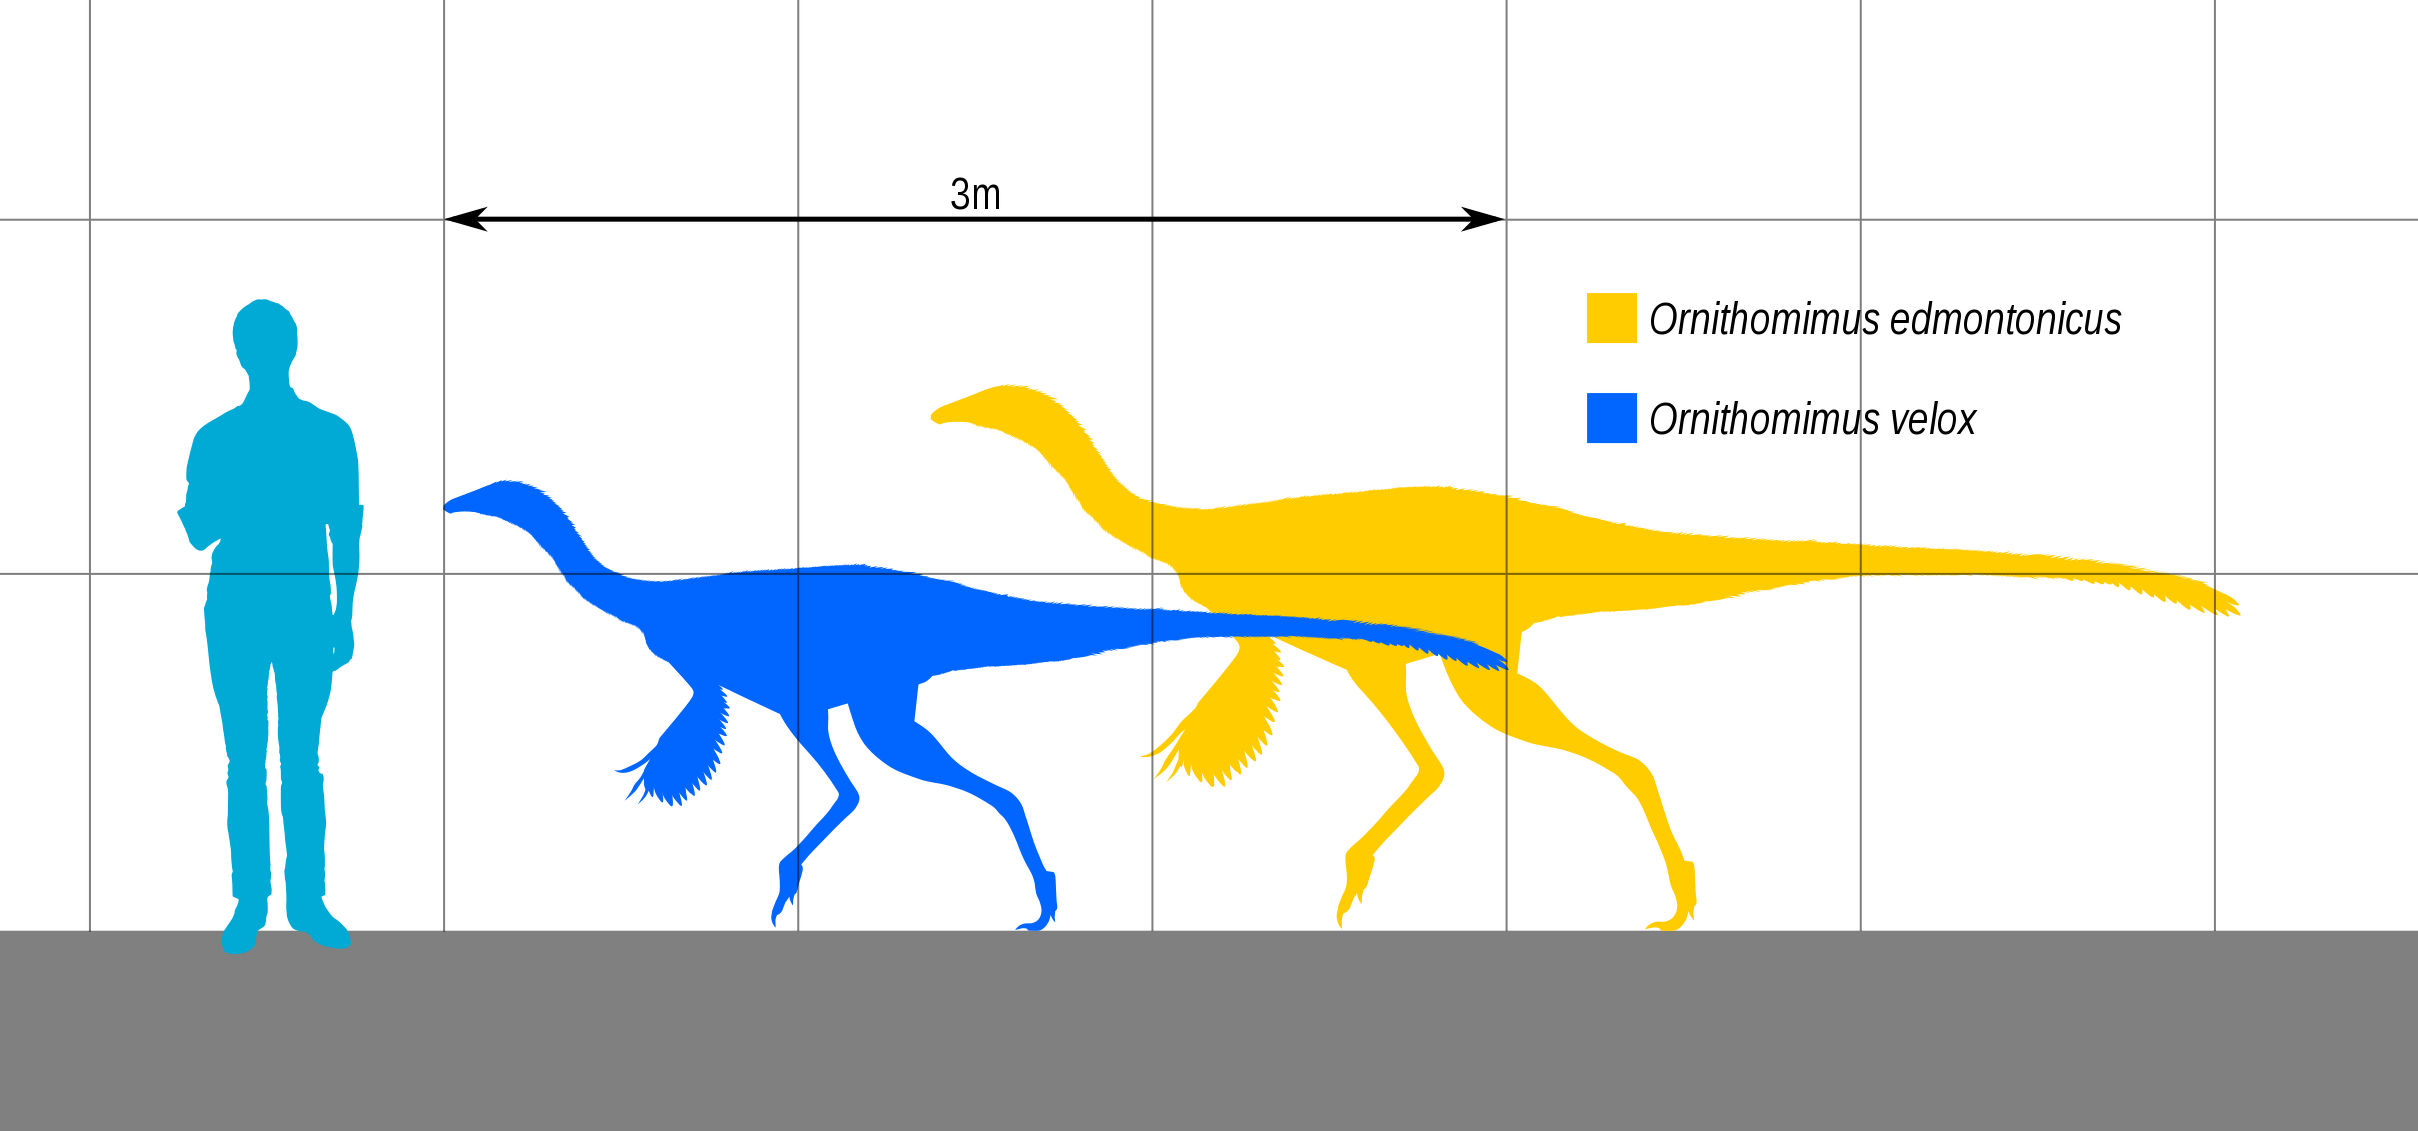 Struthiomimus, illustration. The fastest dinosaur runners were the  long-tailed ostrich-like dinosaurs such as Struthiomimus Stock Photo - Alamy